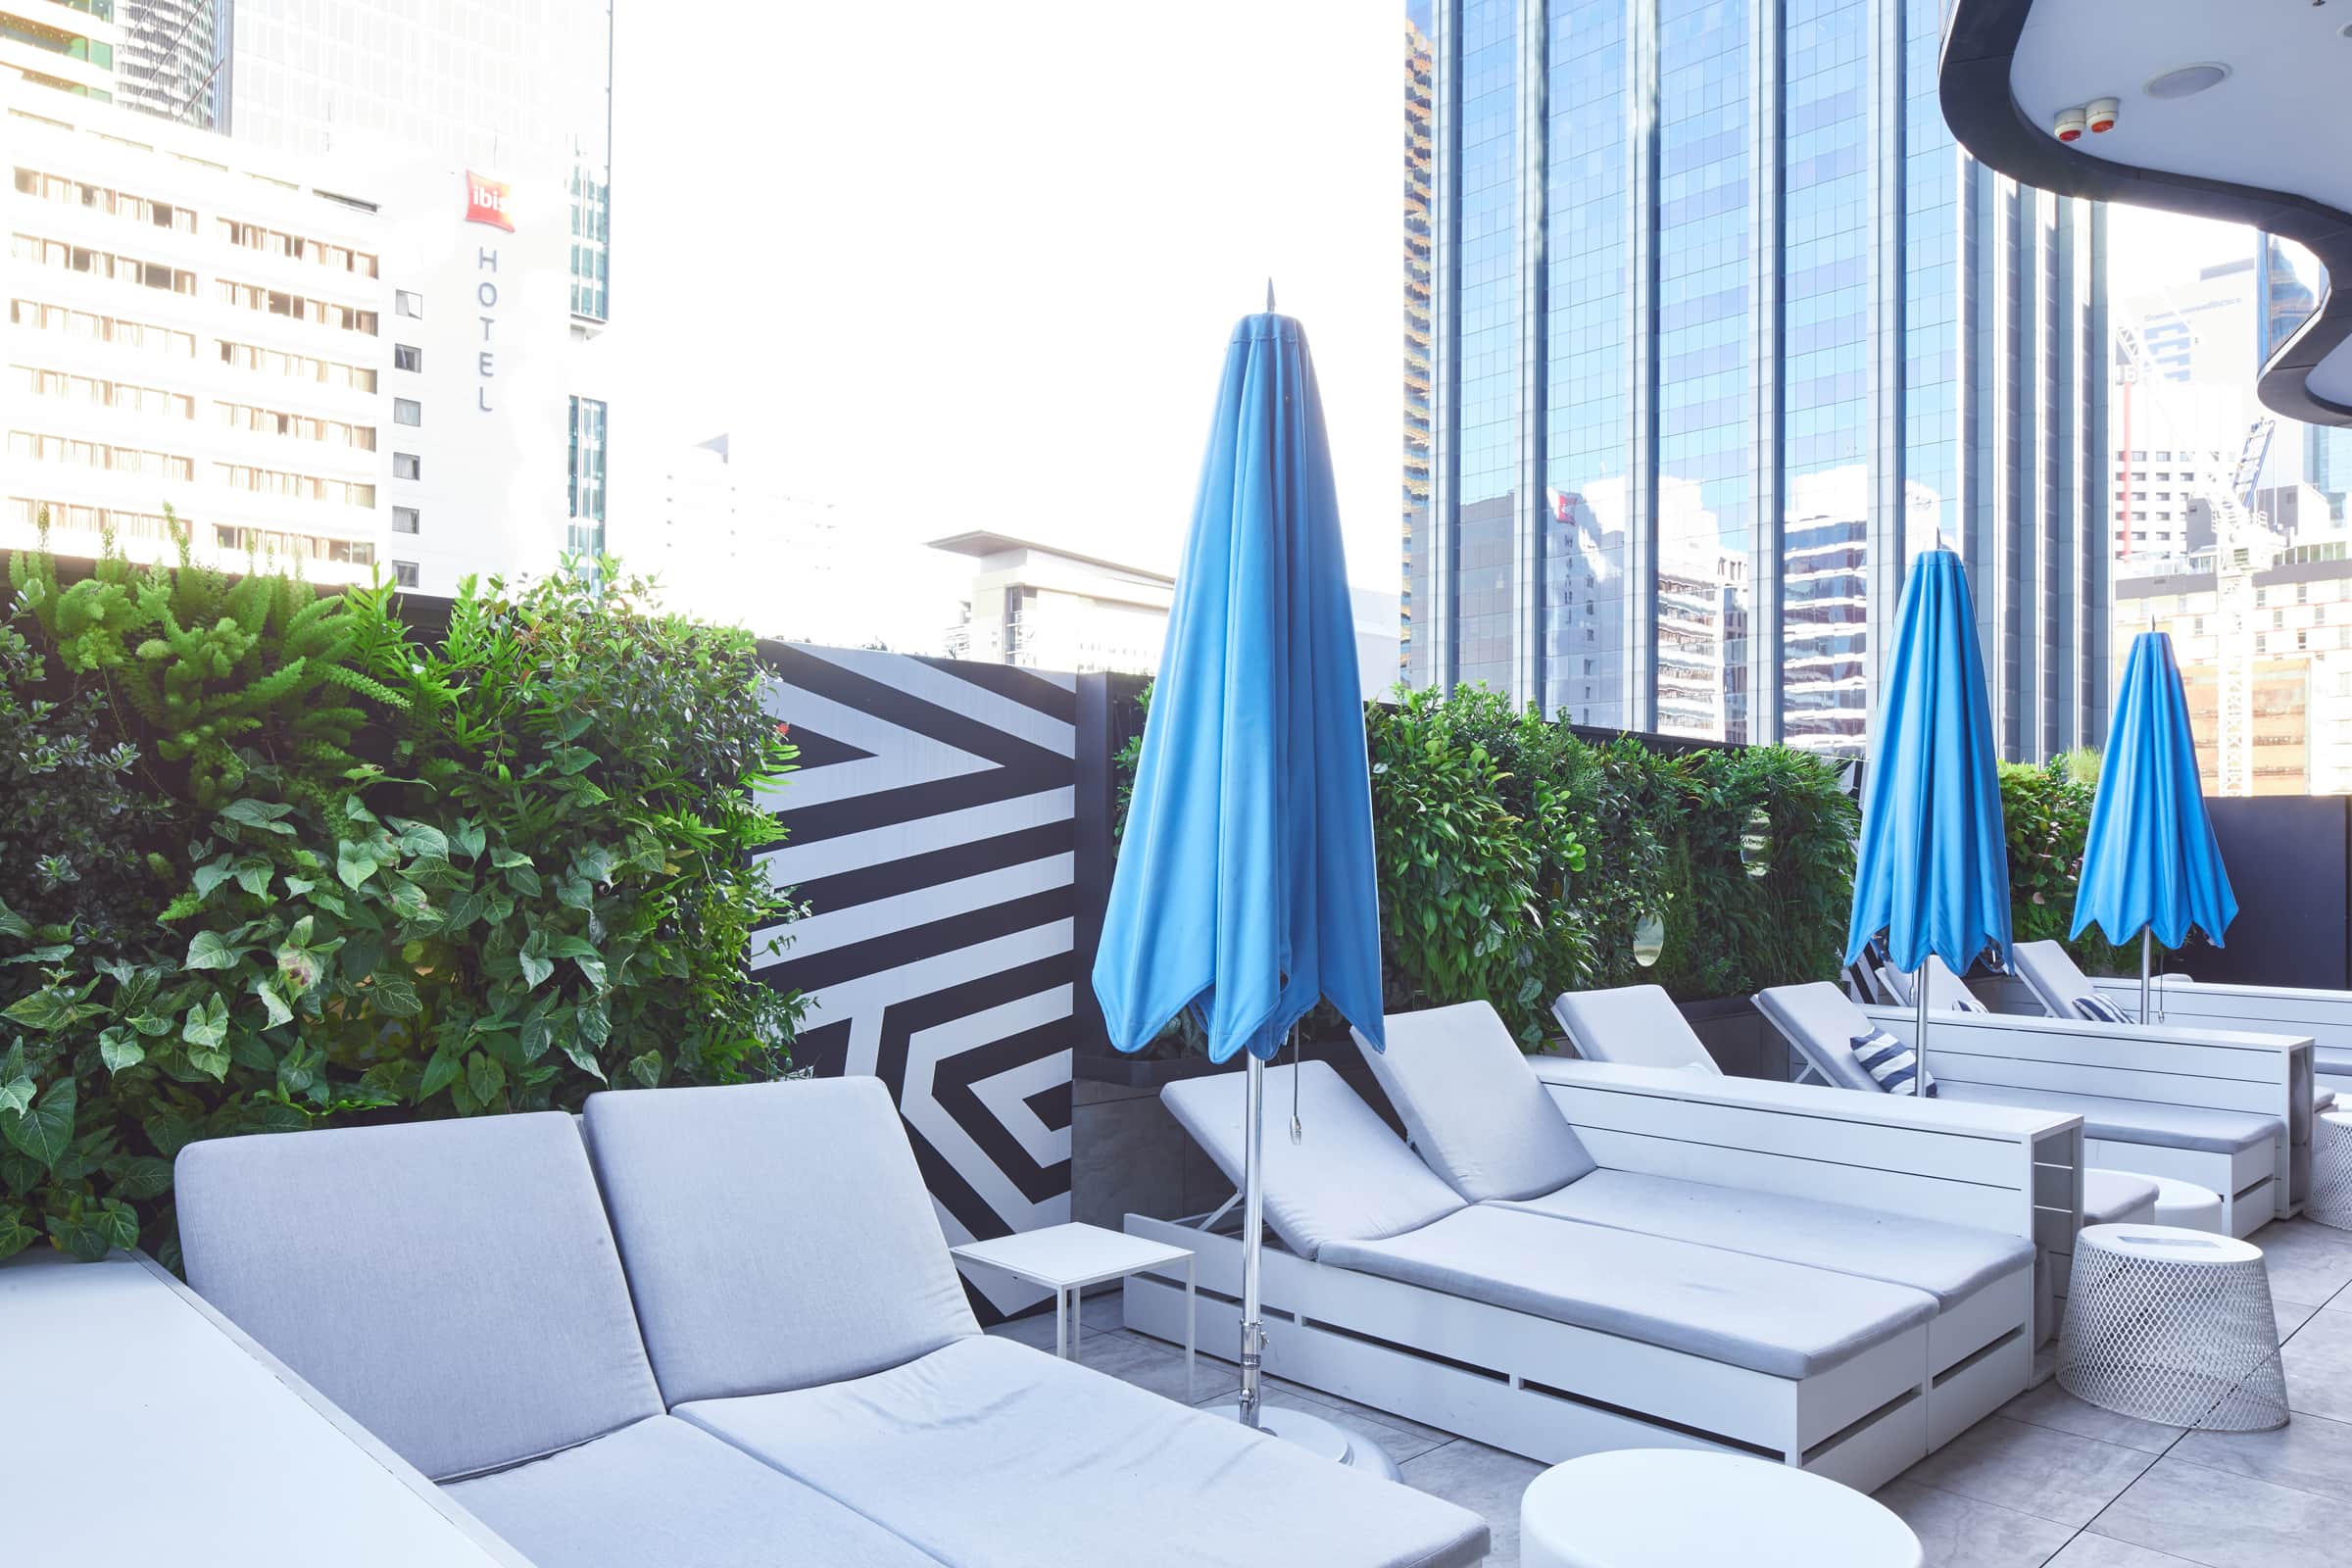 A professional photograph of W Hotel Brisbane's green walls with three closed blue umbrellas in front and pool seating.